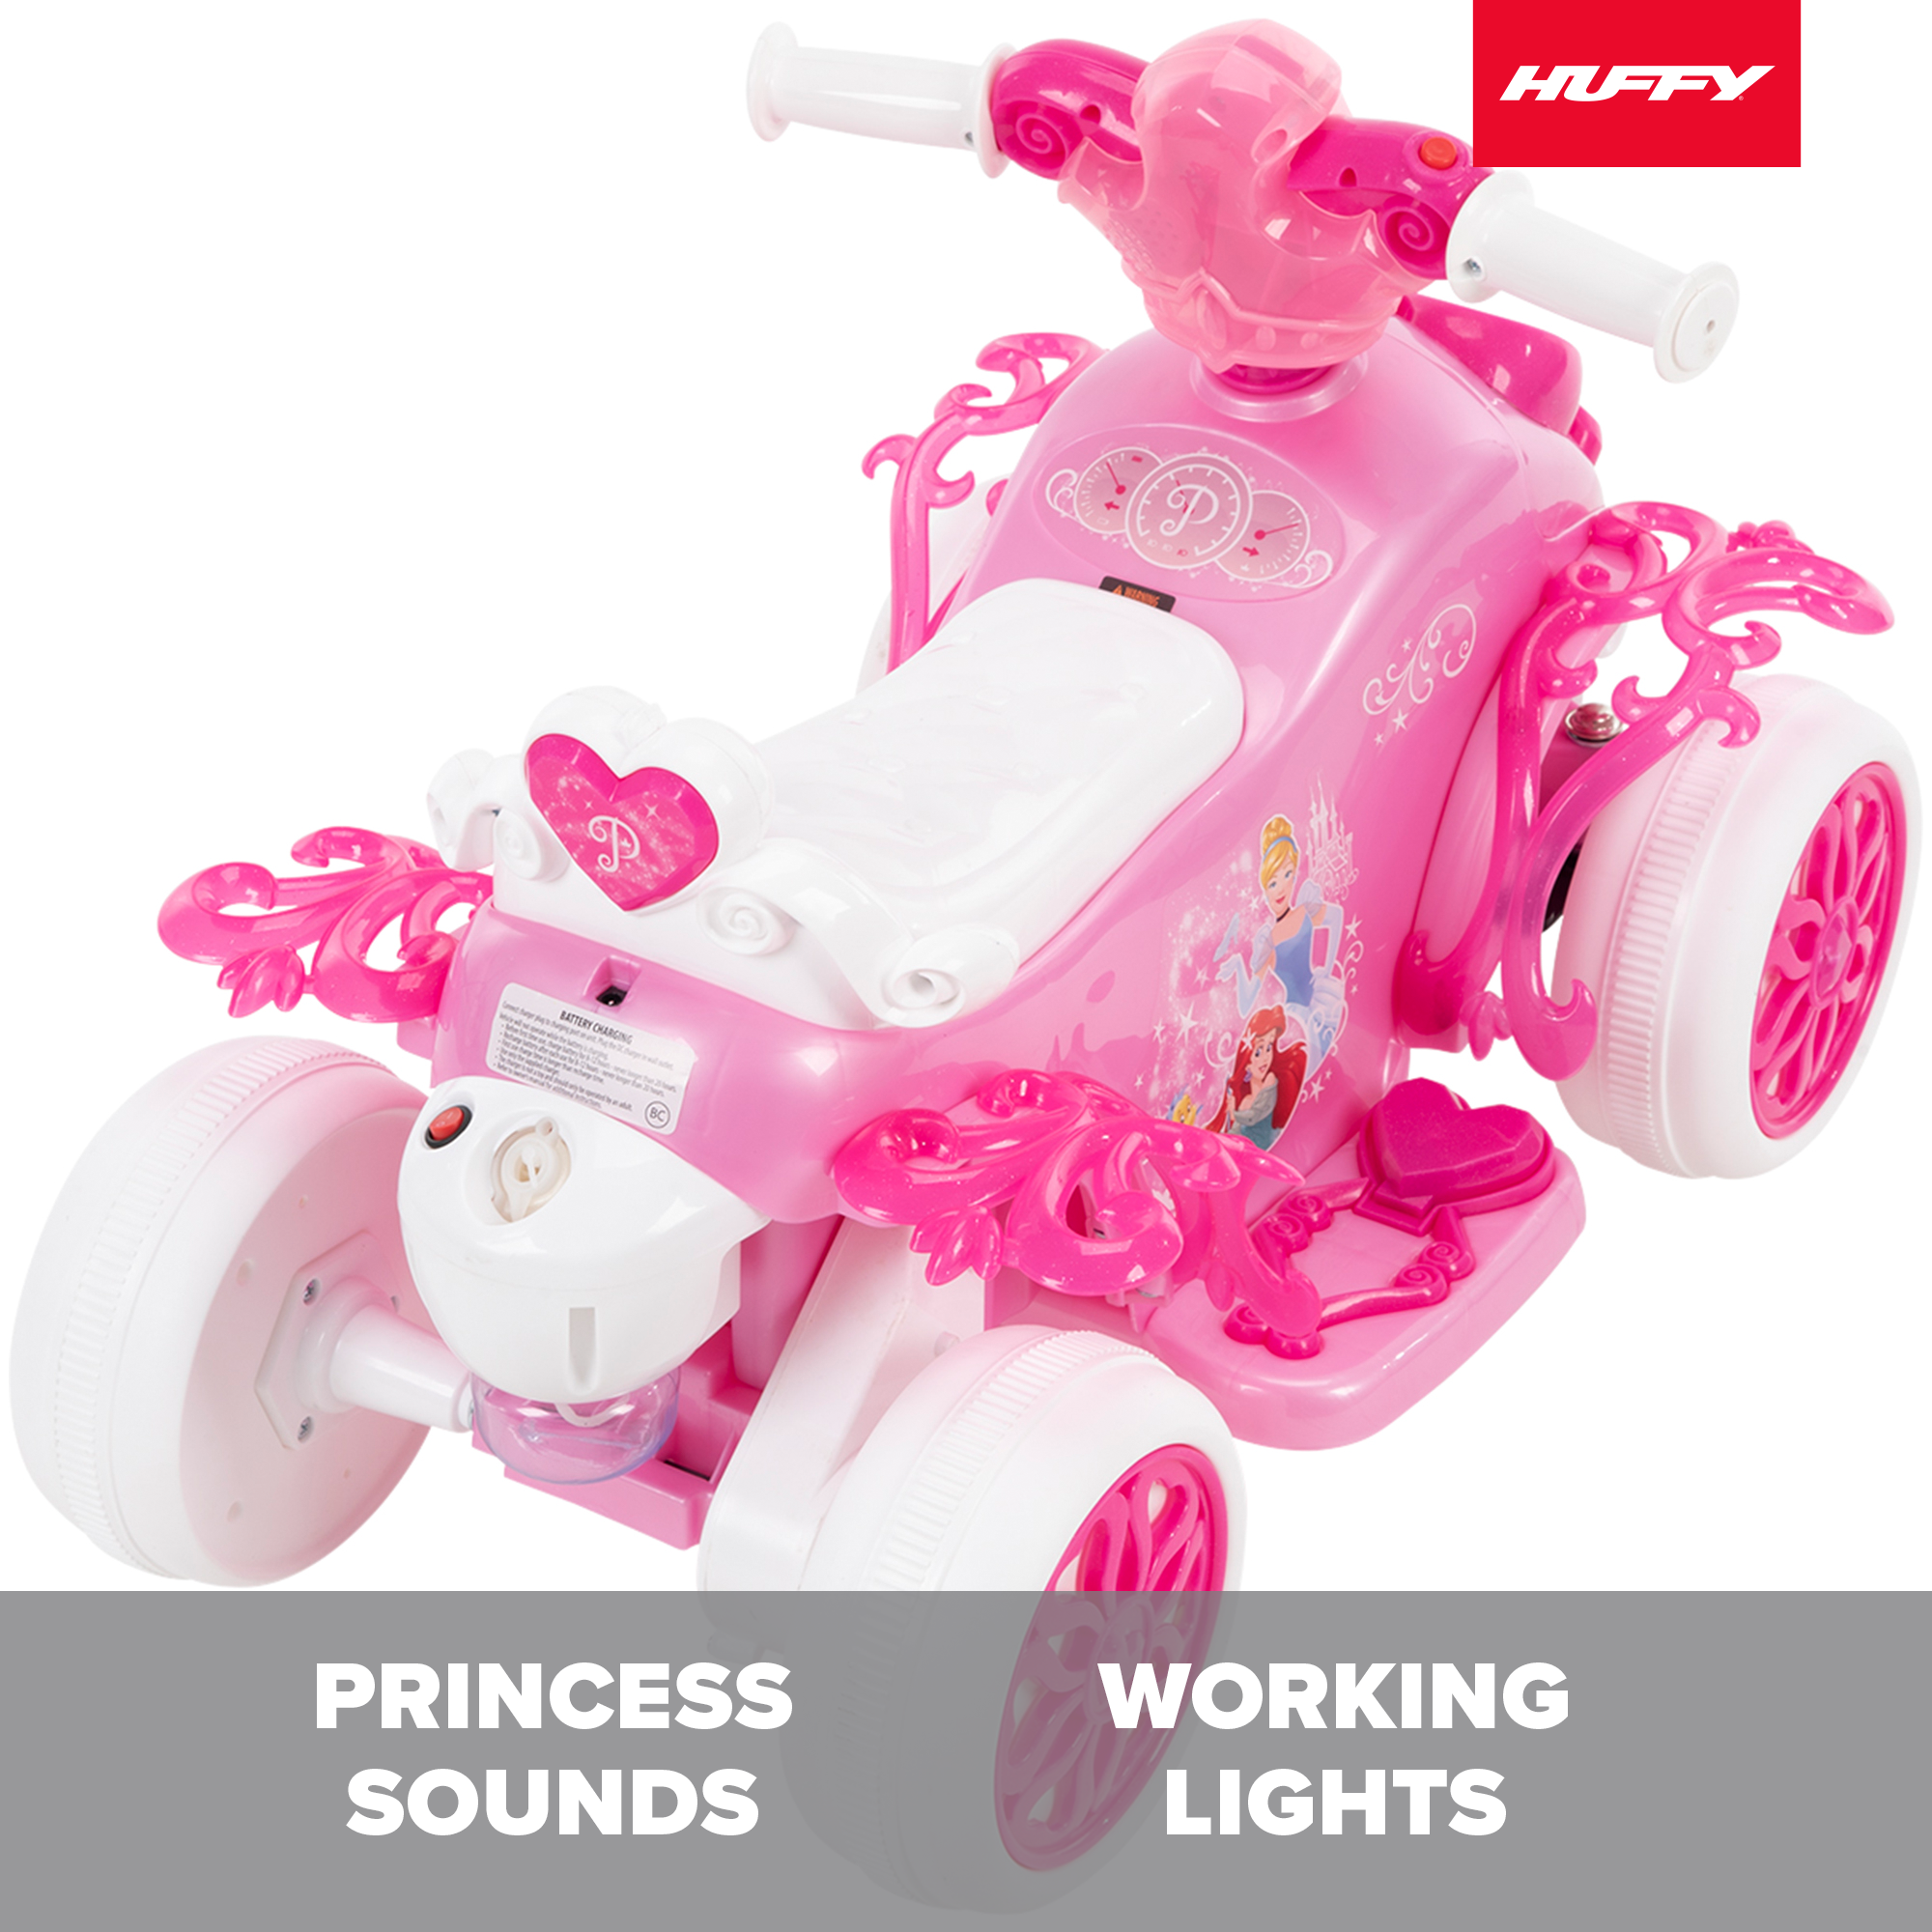 Disney Princess Electric Ride-on Quad, for Children ages 18 months+,  by Huffy - image 5 of 16